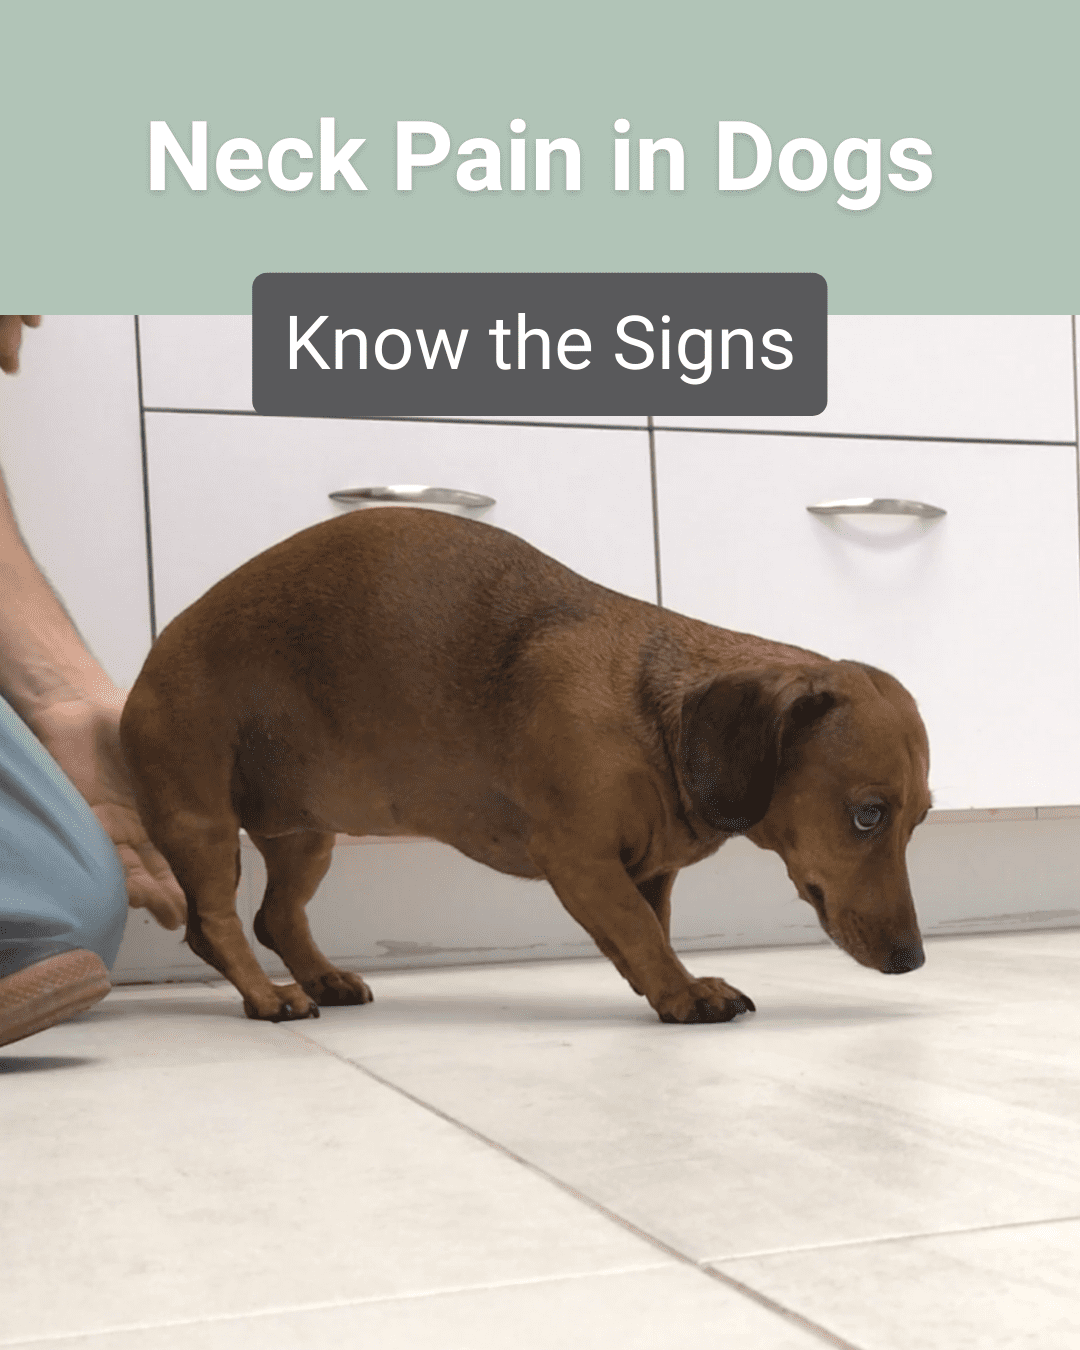 What Are Signs of Neck Pain in Dogs?